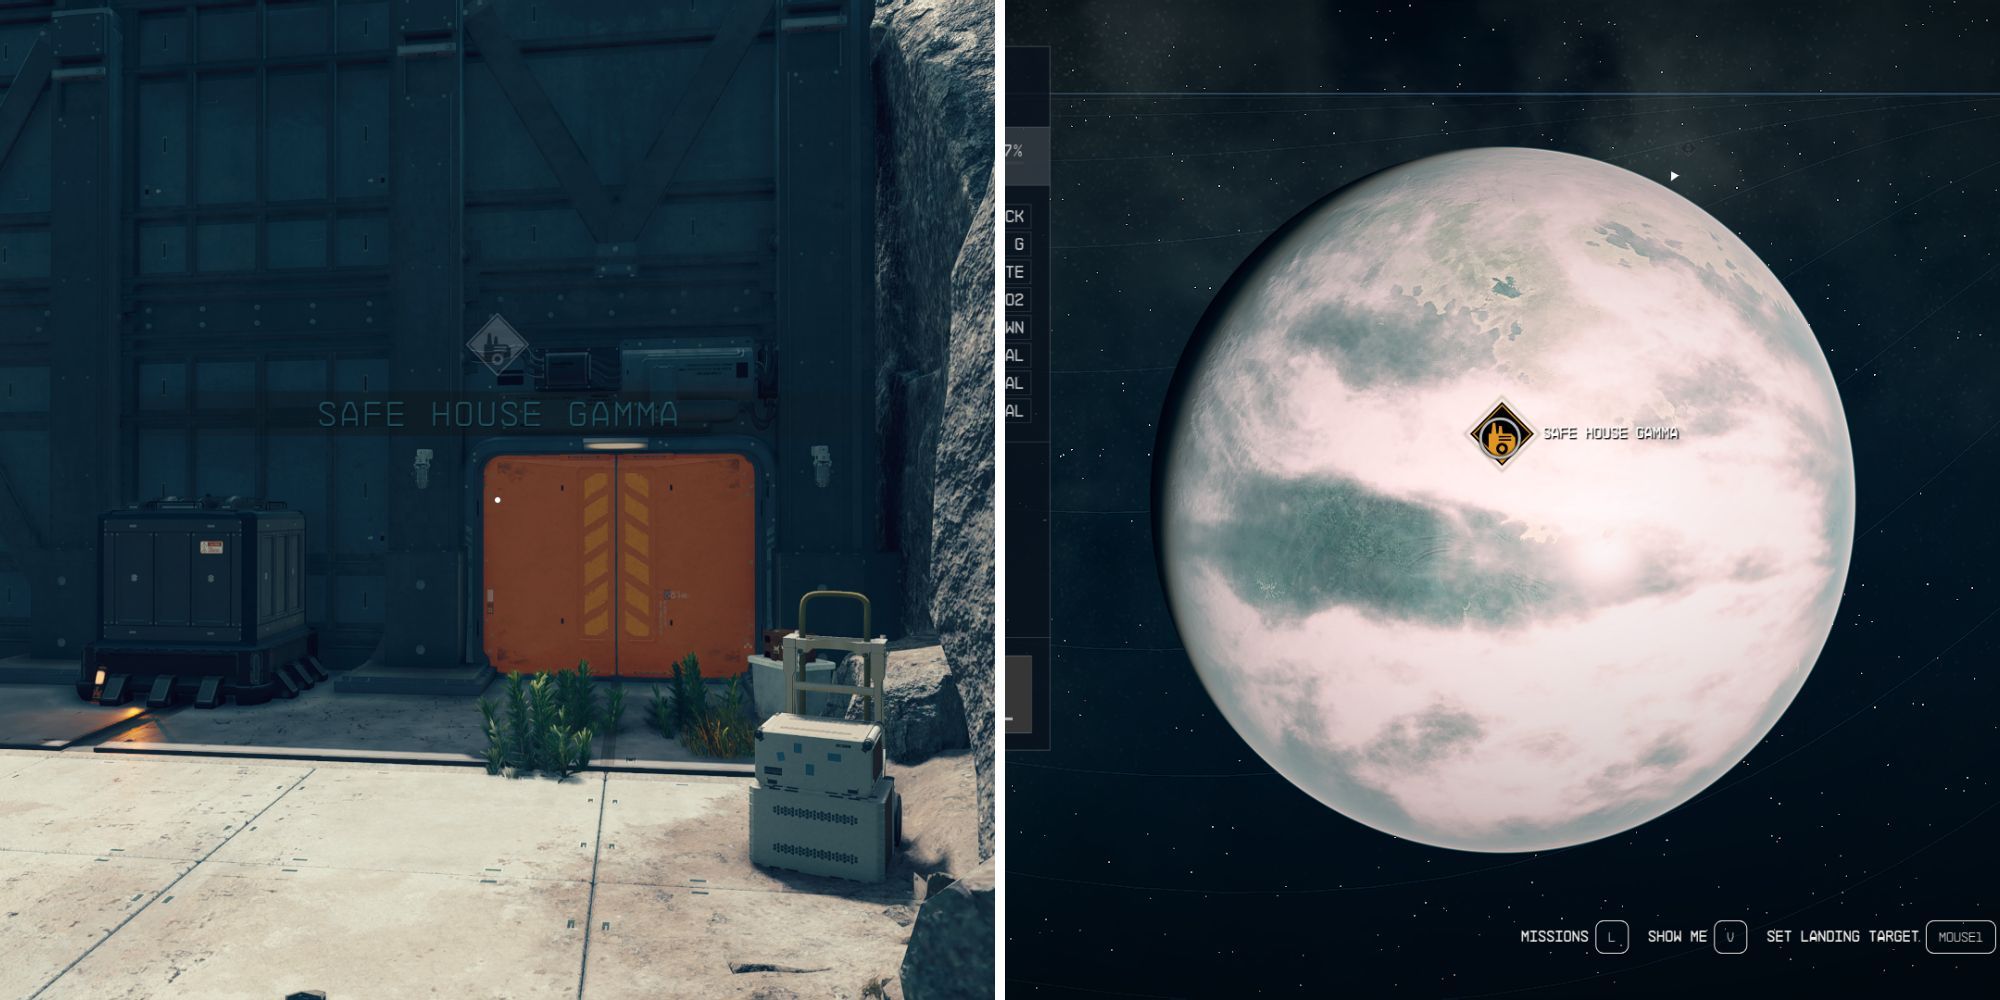 The Player Standing At Safehouse Gamma & Its Location On The Planet